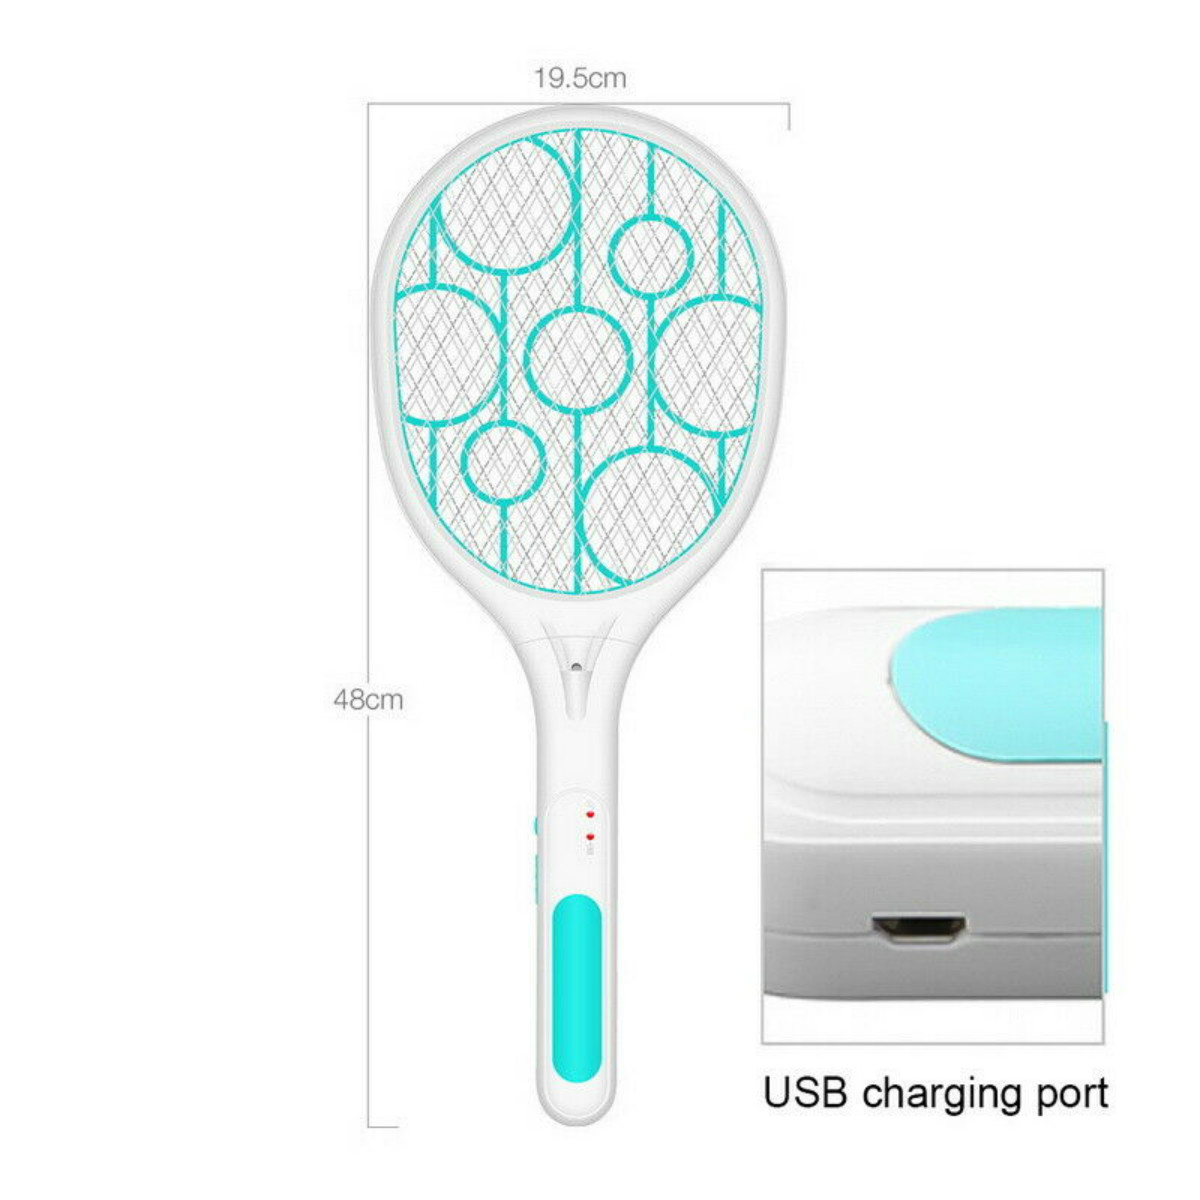 Blue/Green Mosquito Swatter Killer USB Rechargeable Electric LED light Tennis Bat Handheld Racket Insect Fly Bug Wasp